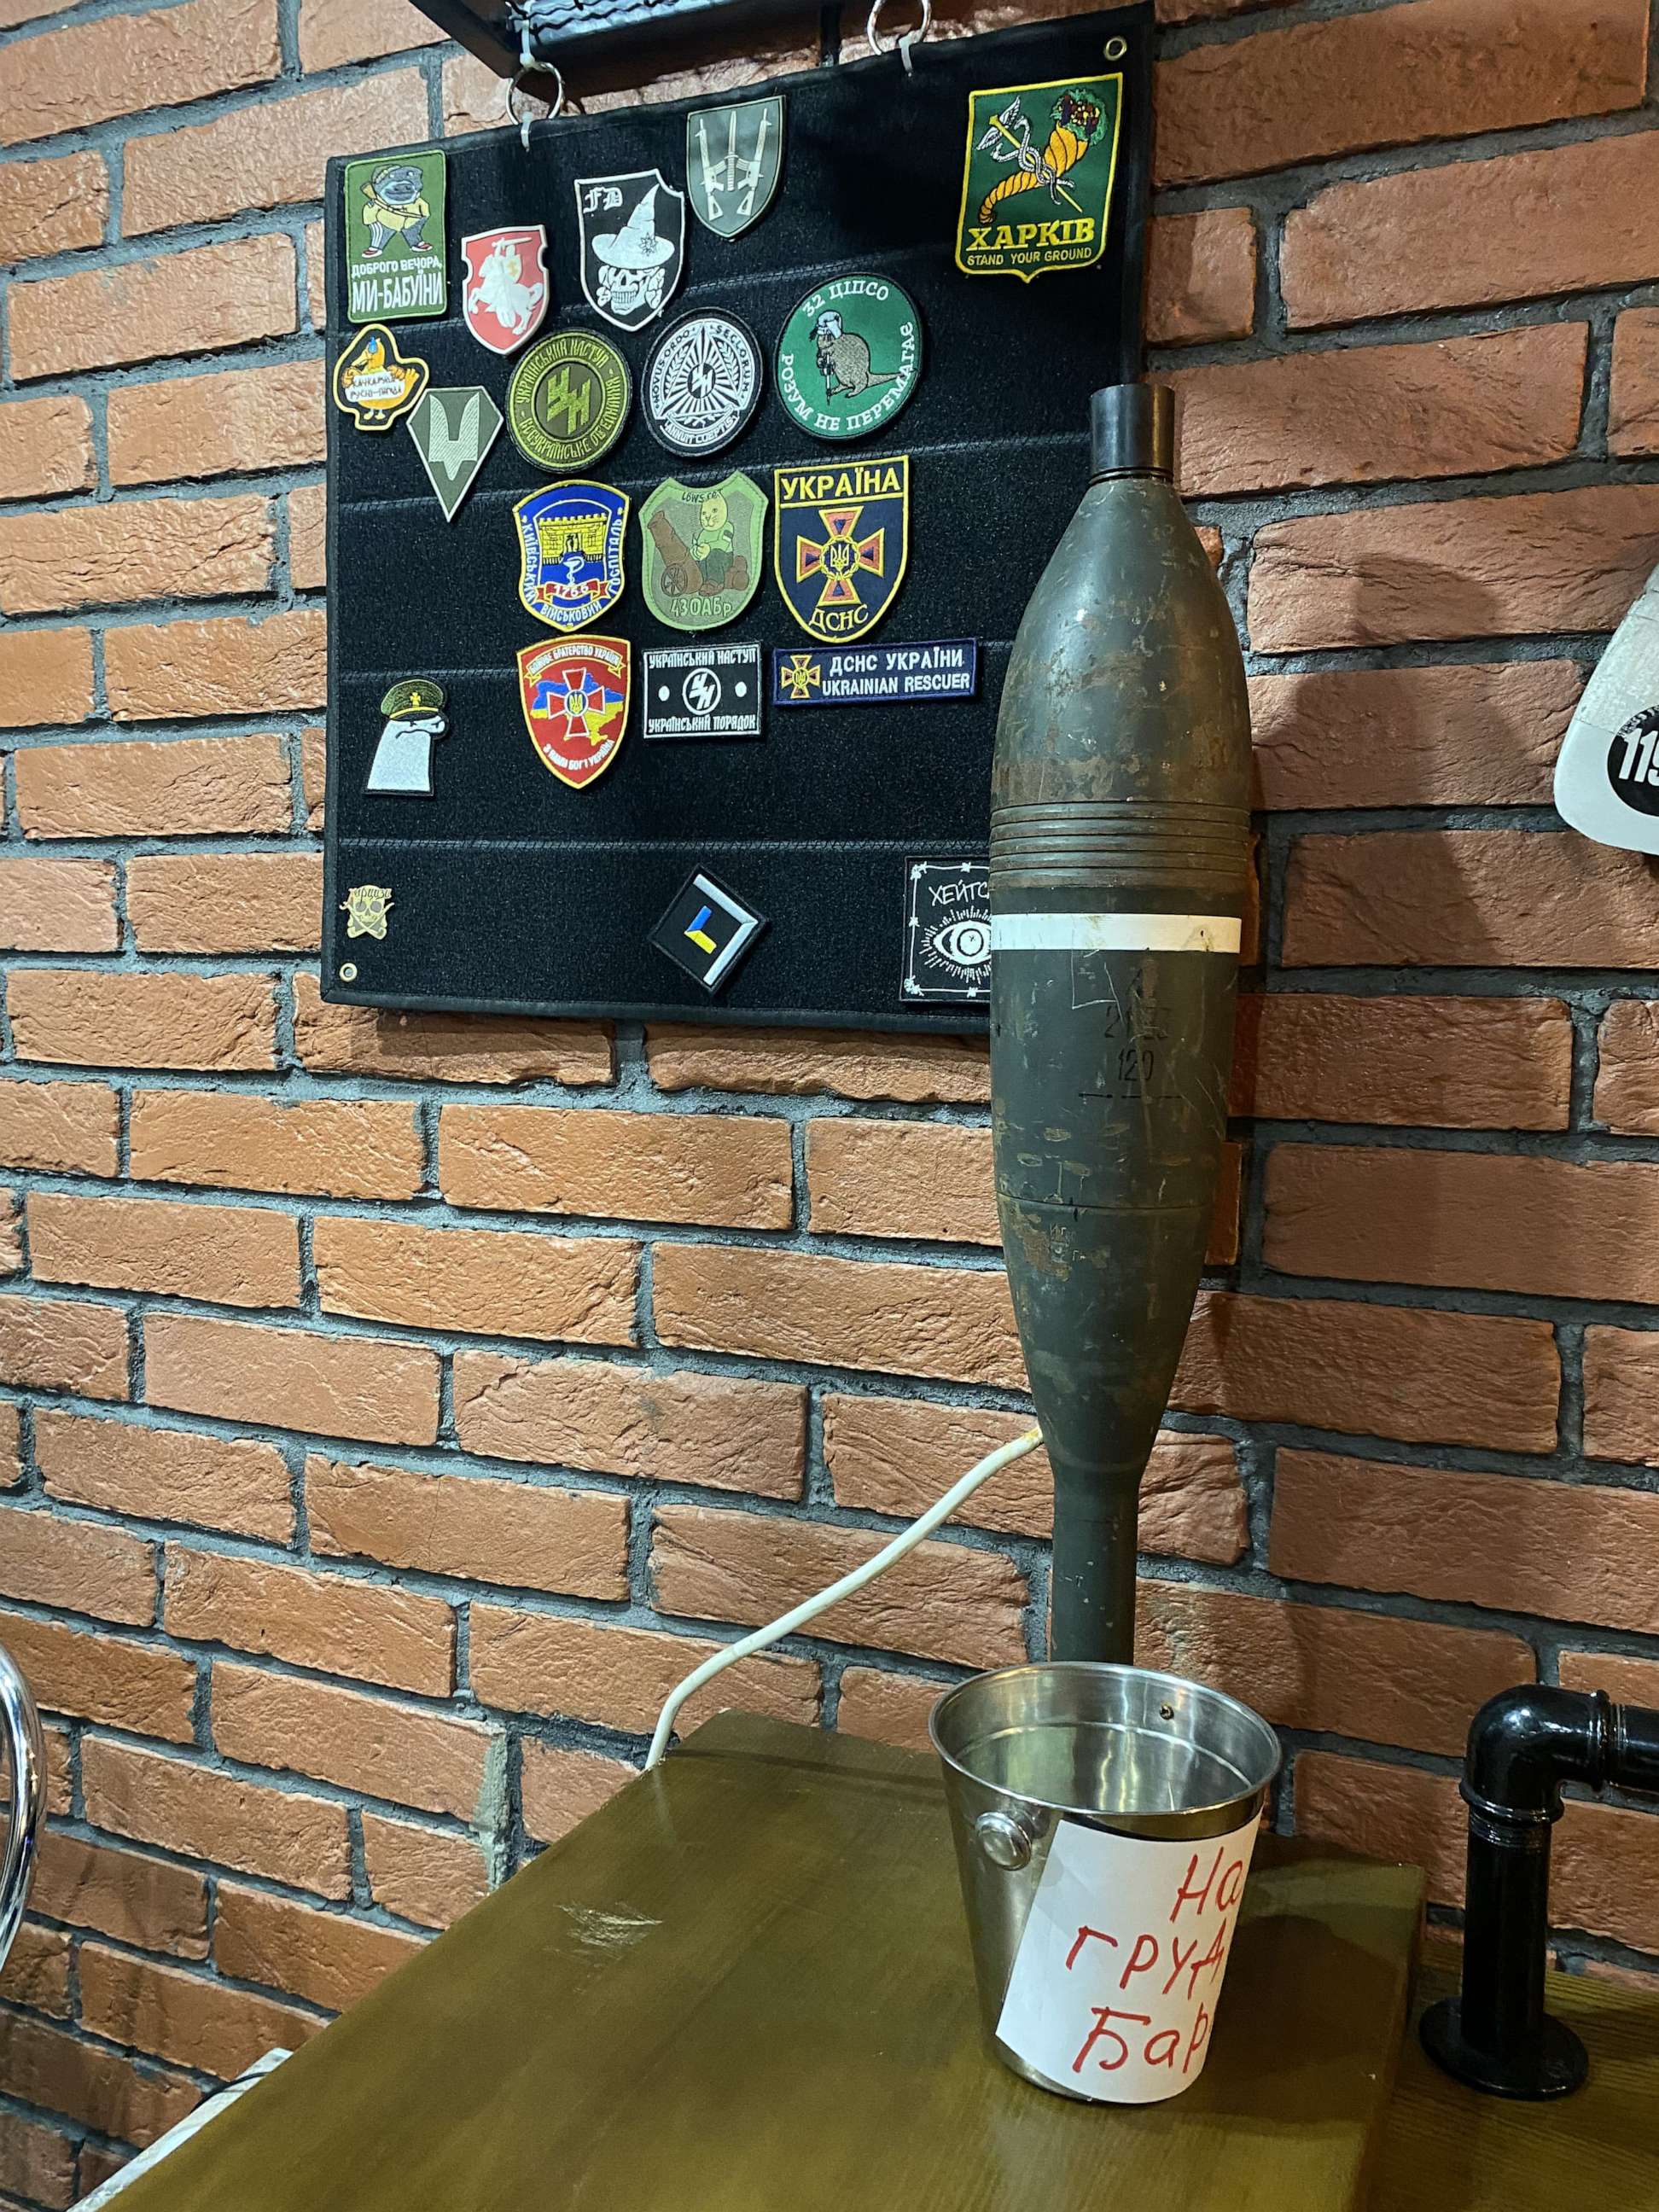 PHOTO: At Offensive, a new bar in Kyiv, Ukraine, patrons eat and drink among ammo, chevrons and other items representing the country's fight against the Russian invasion.